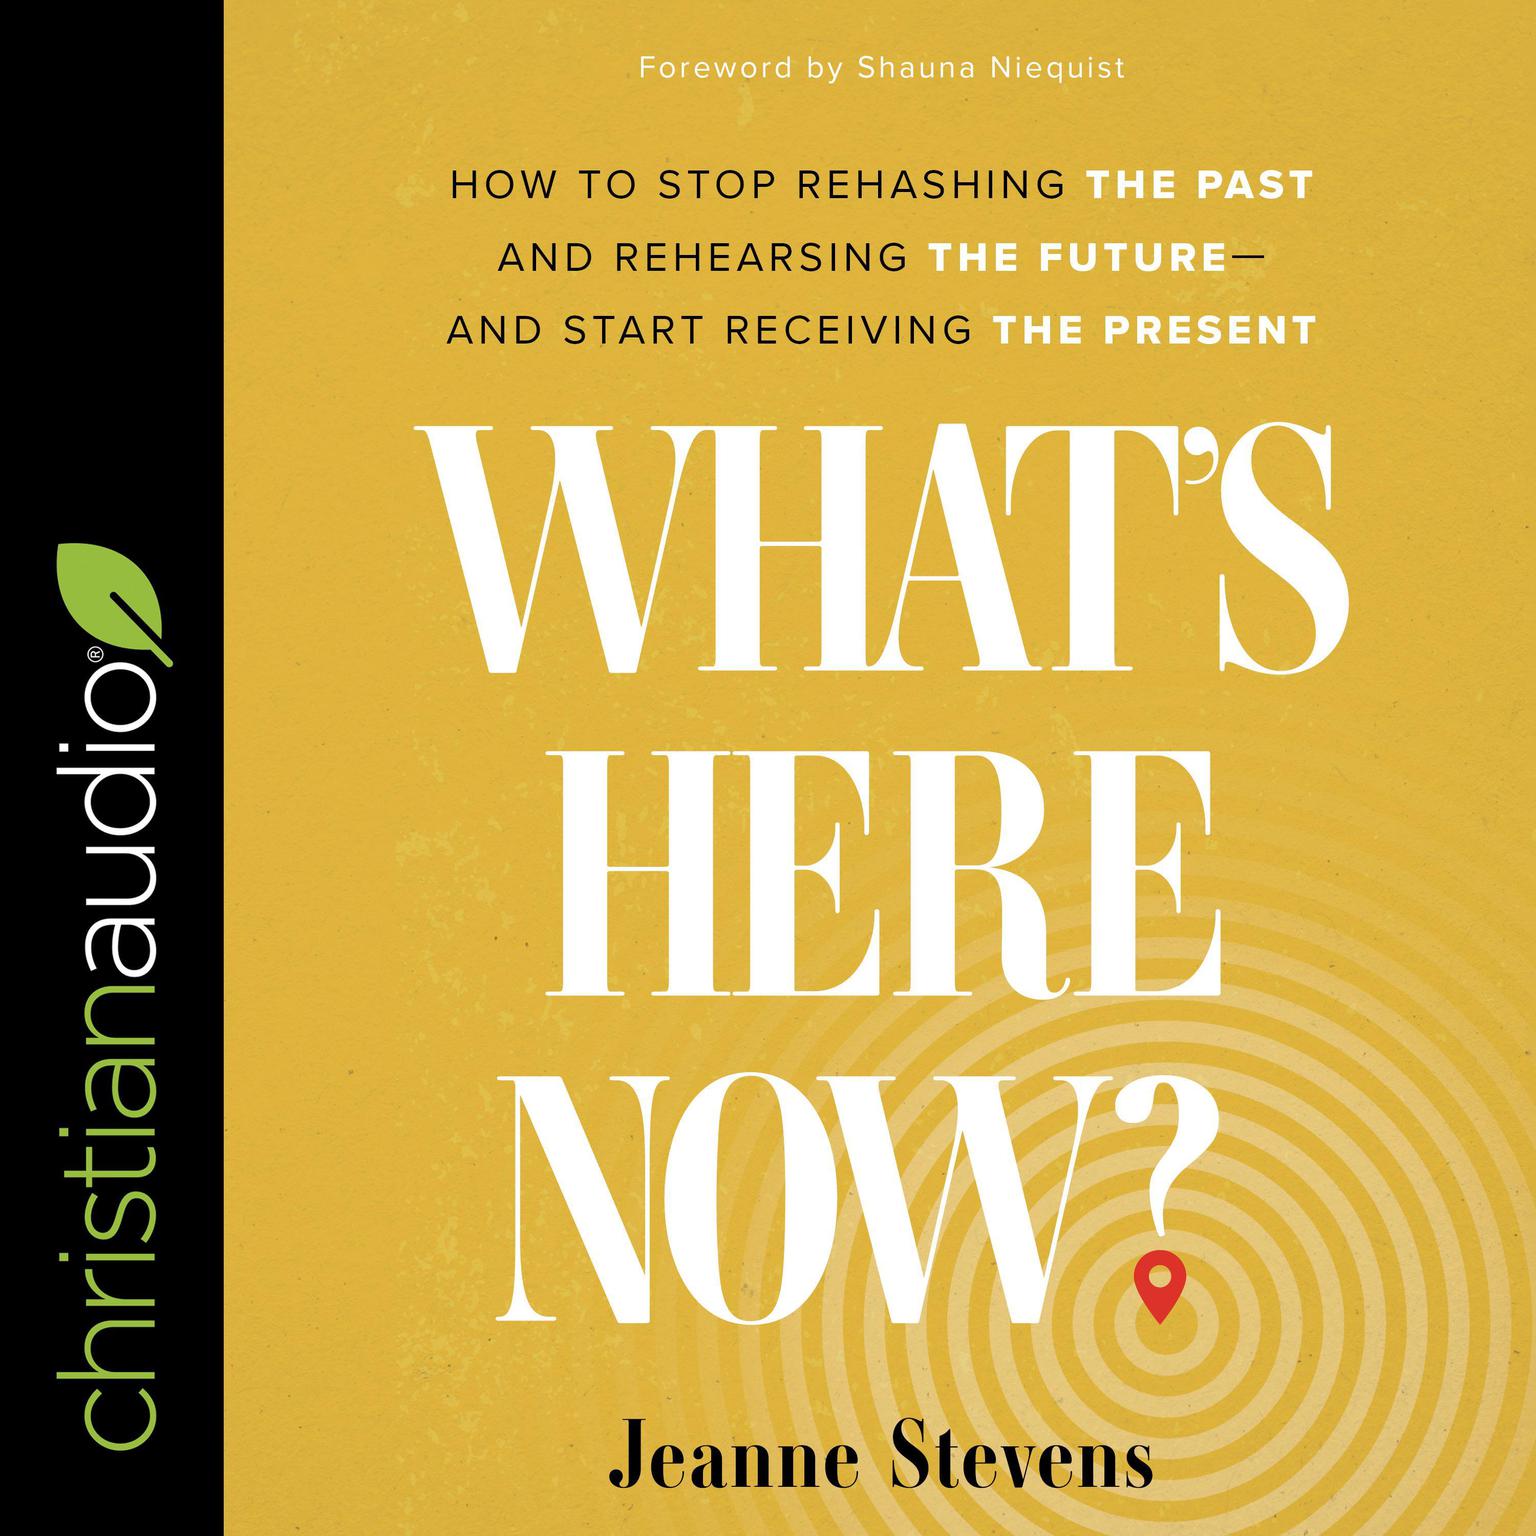 Whats Here Now?: How to Stop Rehashing the Past and Rehearsing the Future--and Start Receiving the Present Audiobook, by Jeanne Stevens